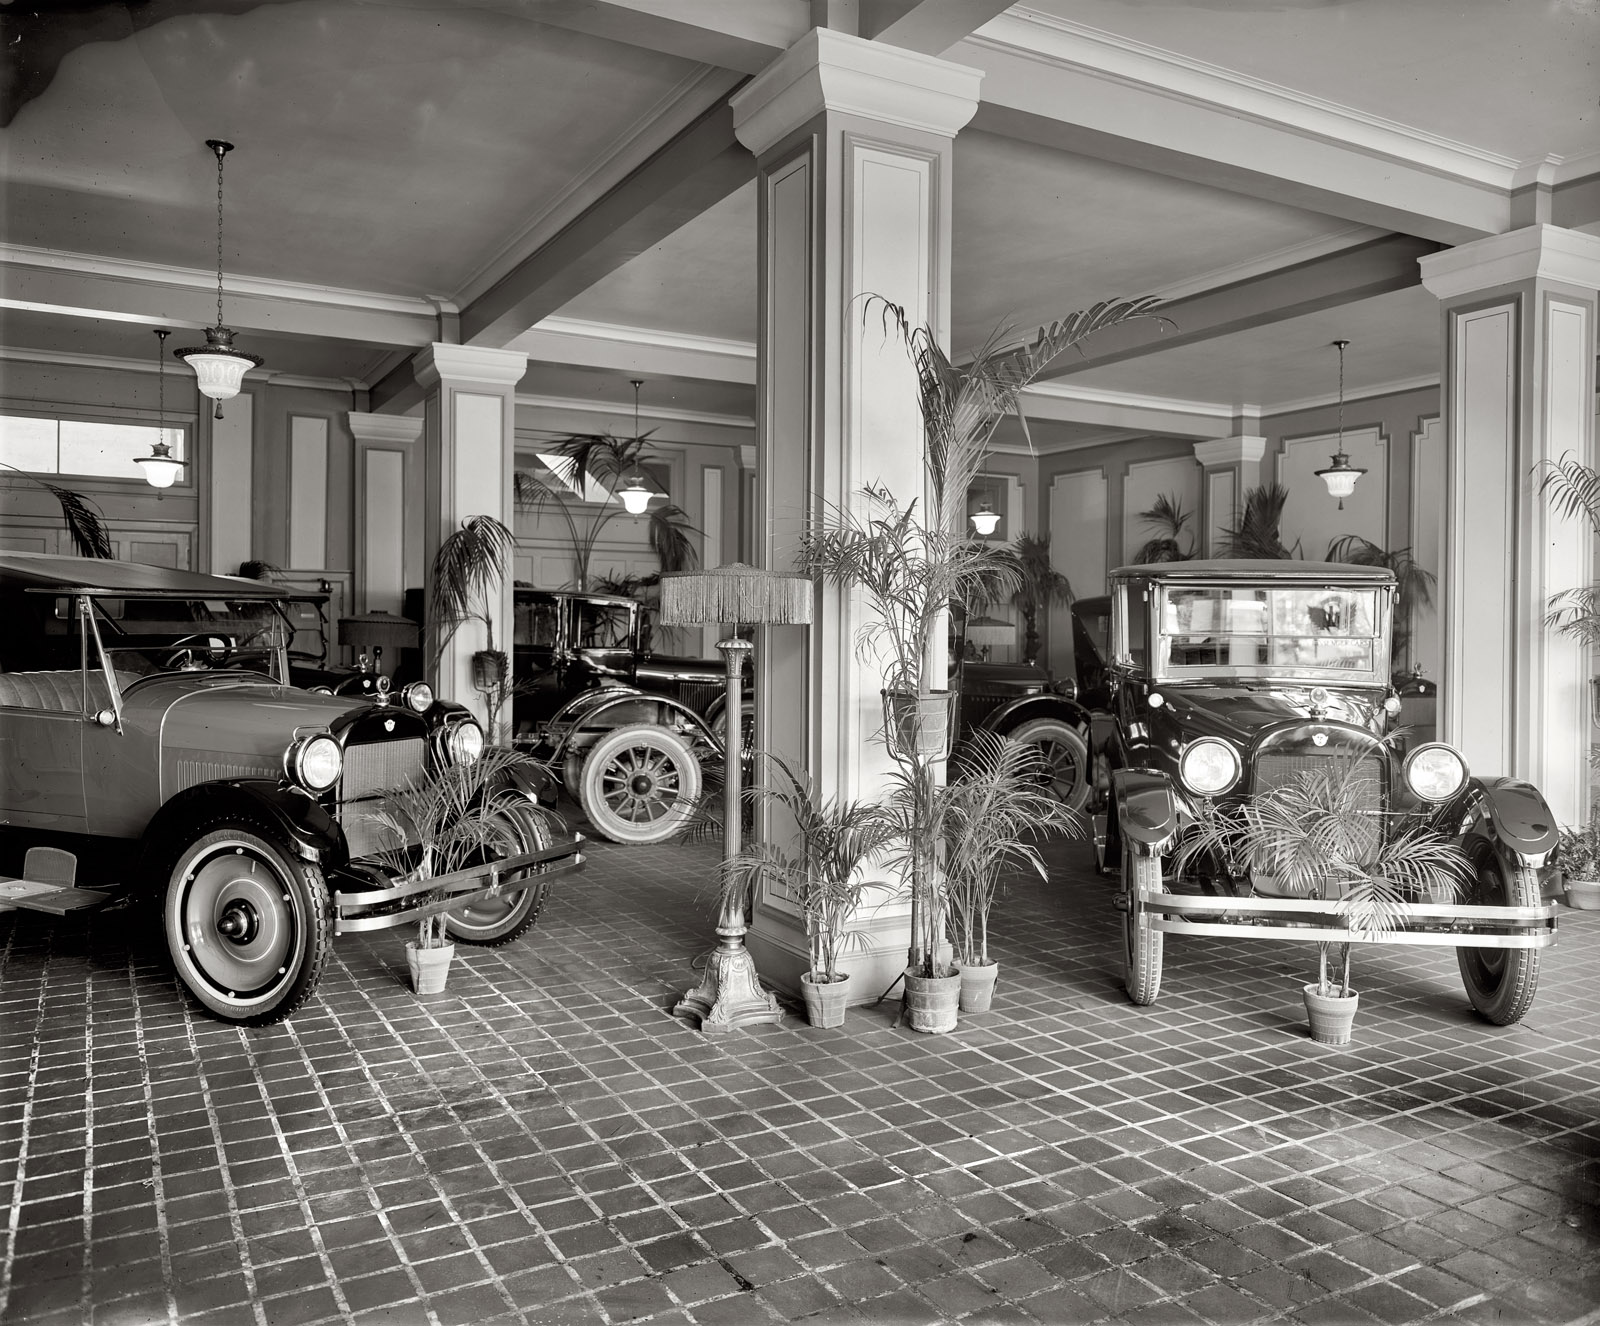 "Trew Motor Co. interior." Circa 1920, the Reo automobile showroom (and conservatory) in Joseph Trew's new three-story building at 14th and P Streets N.W. in Washington. National Photo Company glass negative. View full size.
